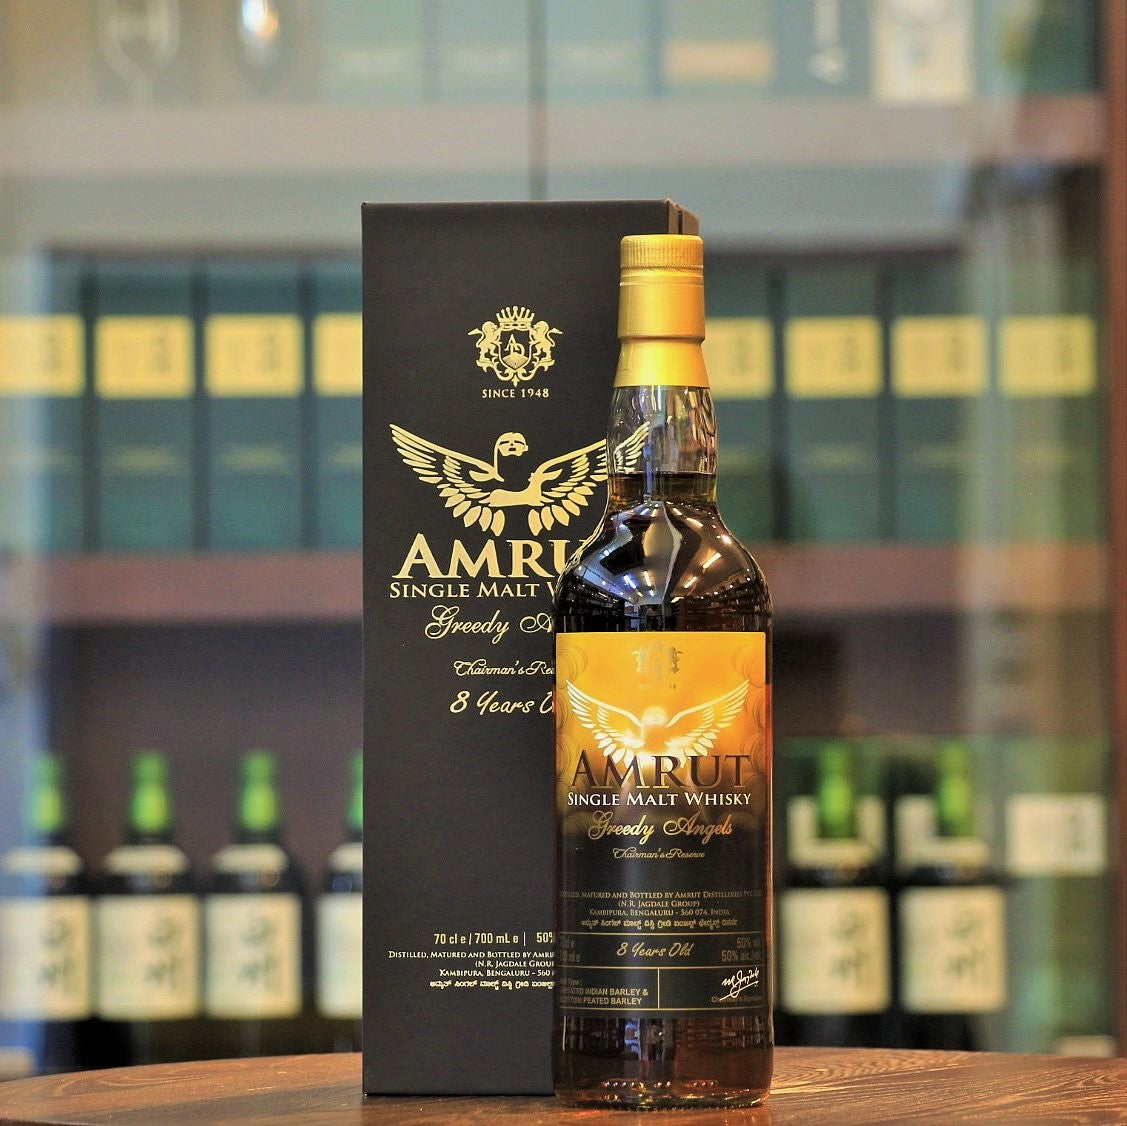 Released to celebrate Amrut Distillery Chairman, Mr. Neel Jagdale's 60th birthday, only 1350 bottles were released in 2017. This was the oldest age statement at the time of its released and is part of the Greedy Angel's Series of bottlings (including a10 year and 12 year old release).